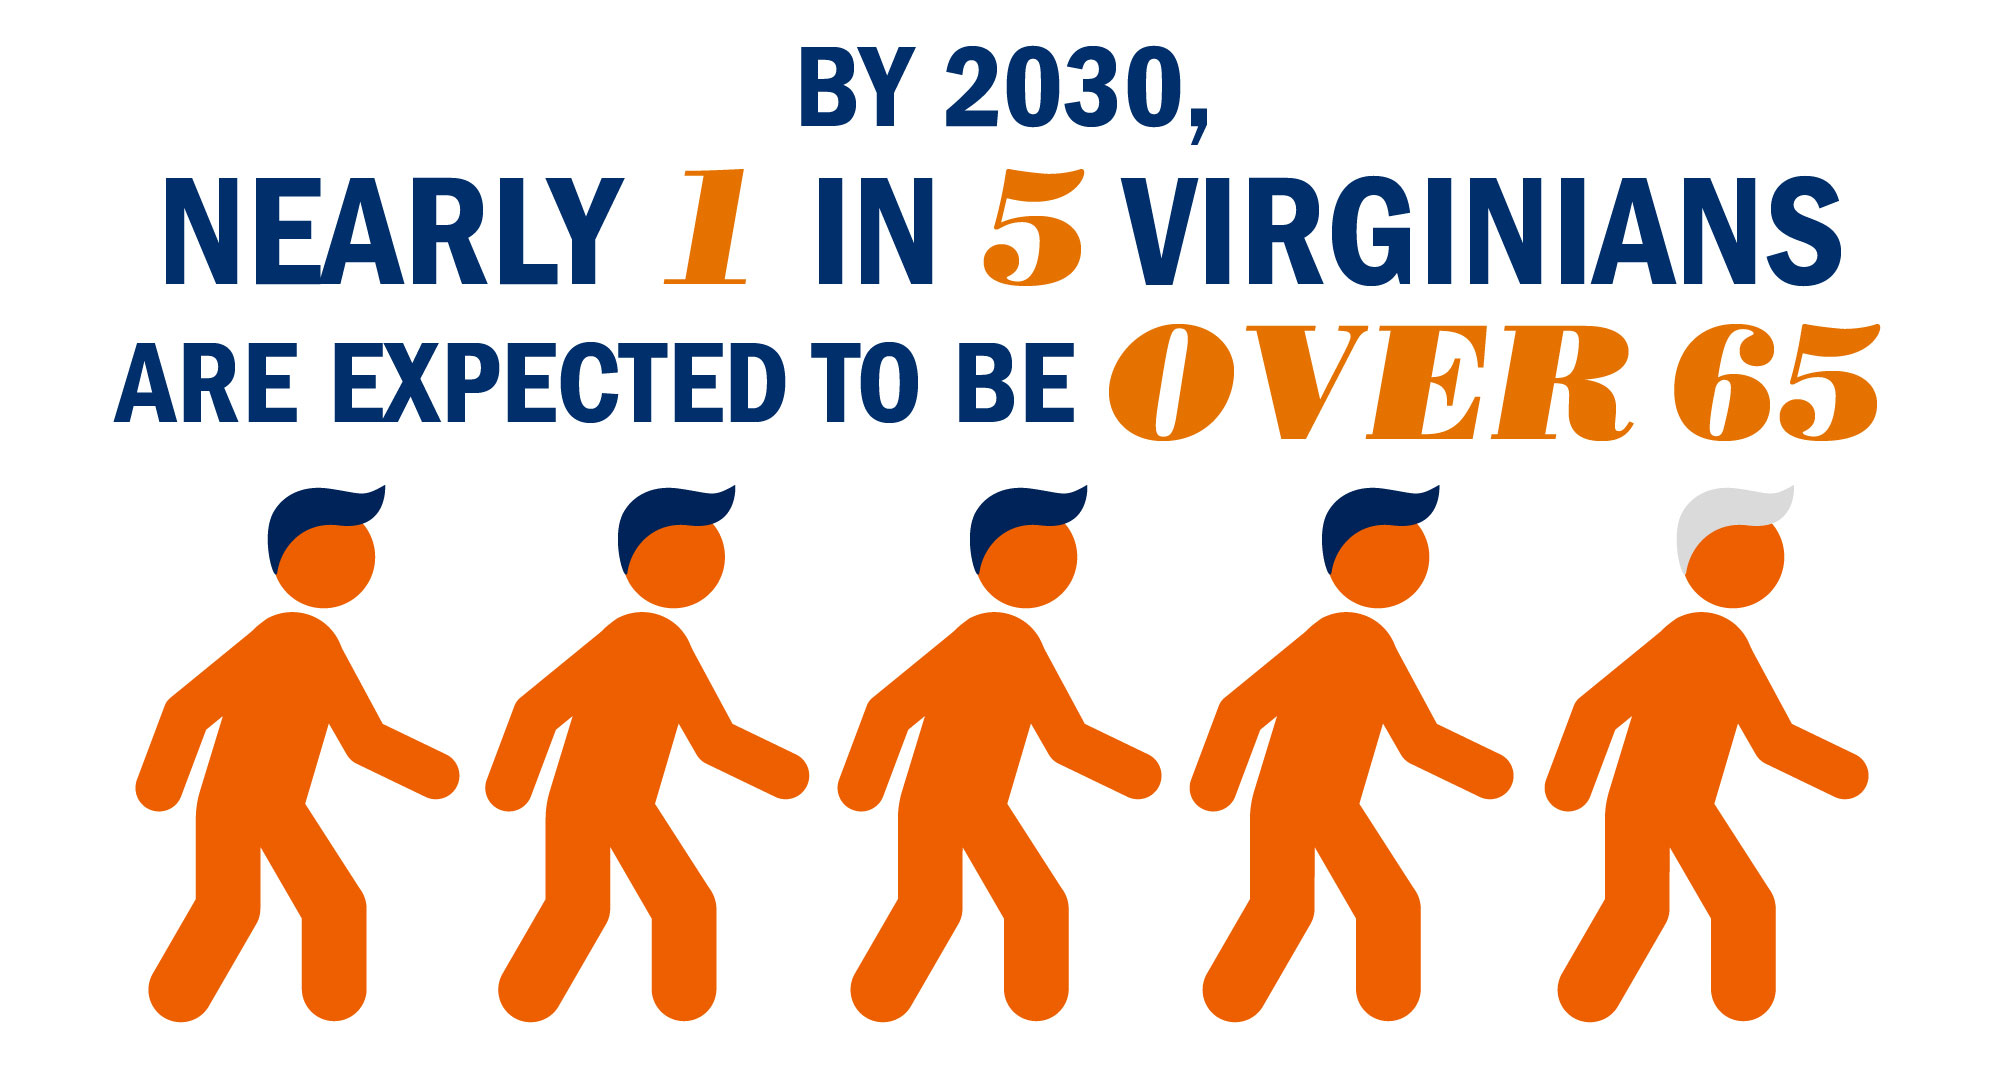 By 2030 Nearly 1 in 5 Virginias are expected to be over 65